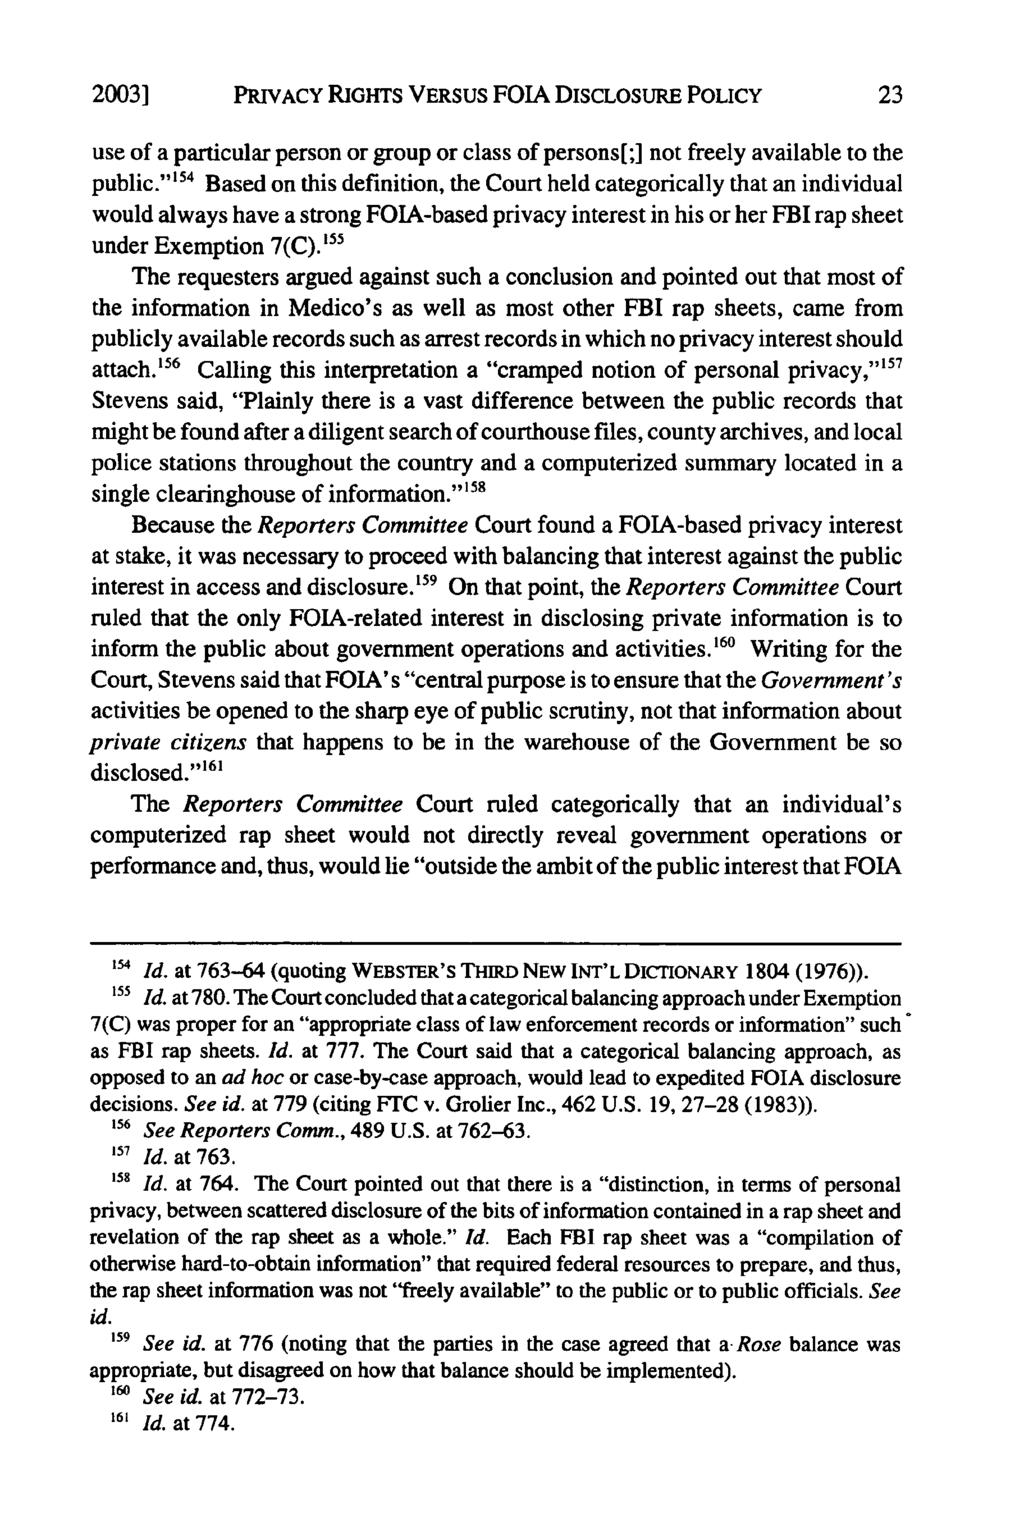 20031 PRIVACY RIGHTS VERSUS FOIA DISCLOSURE POLICY use of a particular person or group or class of persons[;] not freely available to the public.